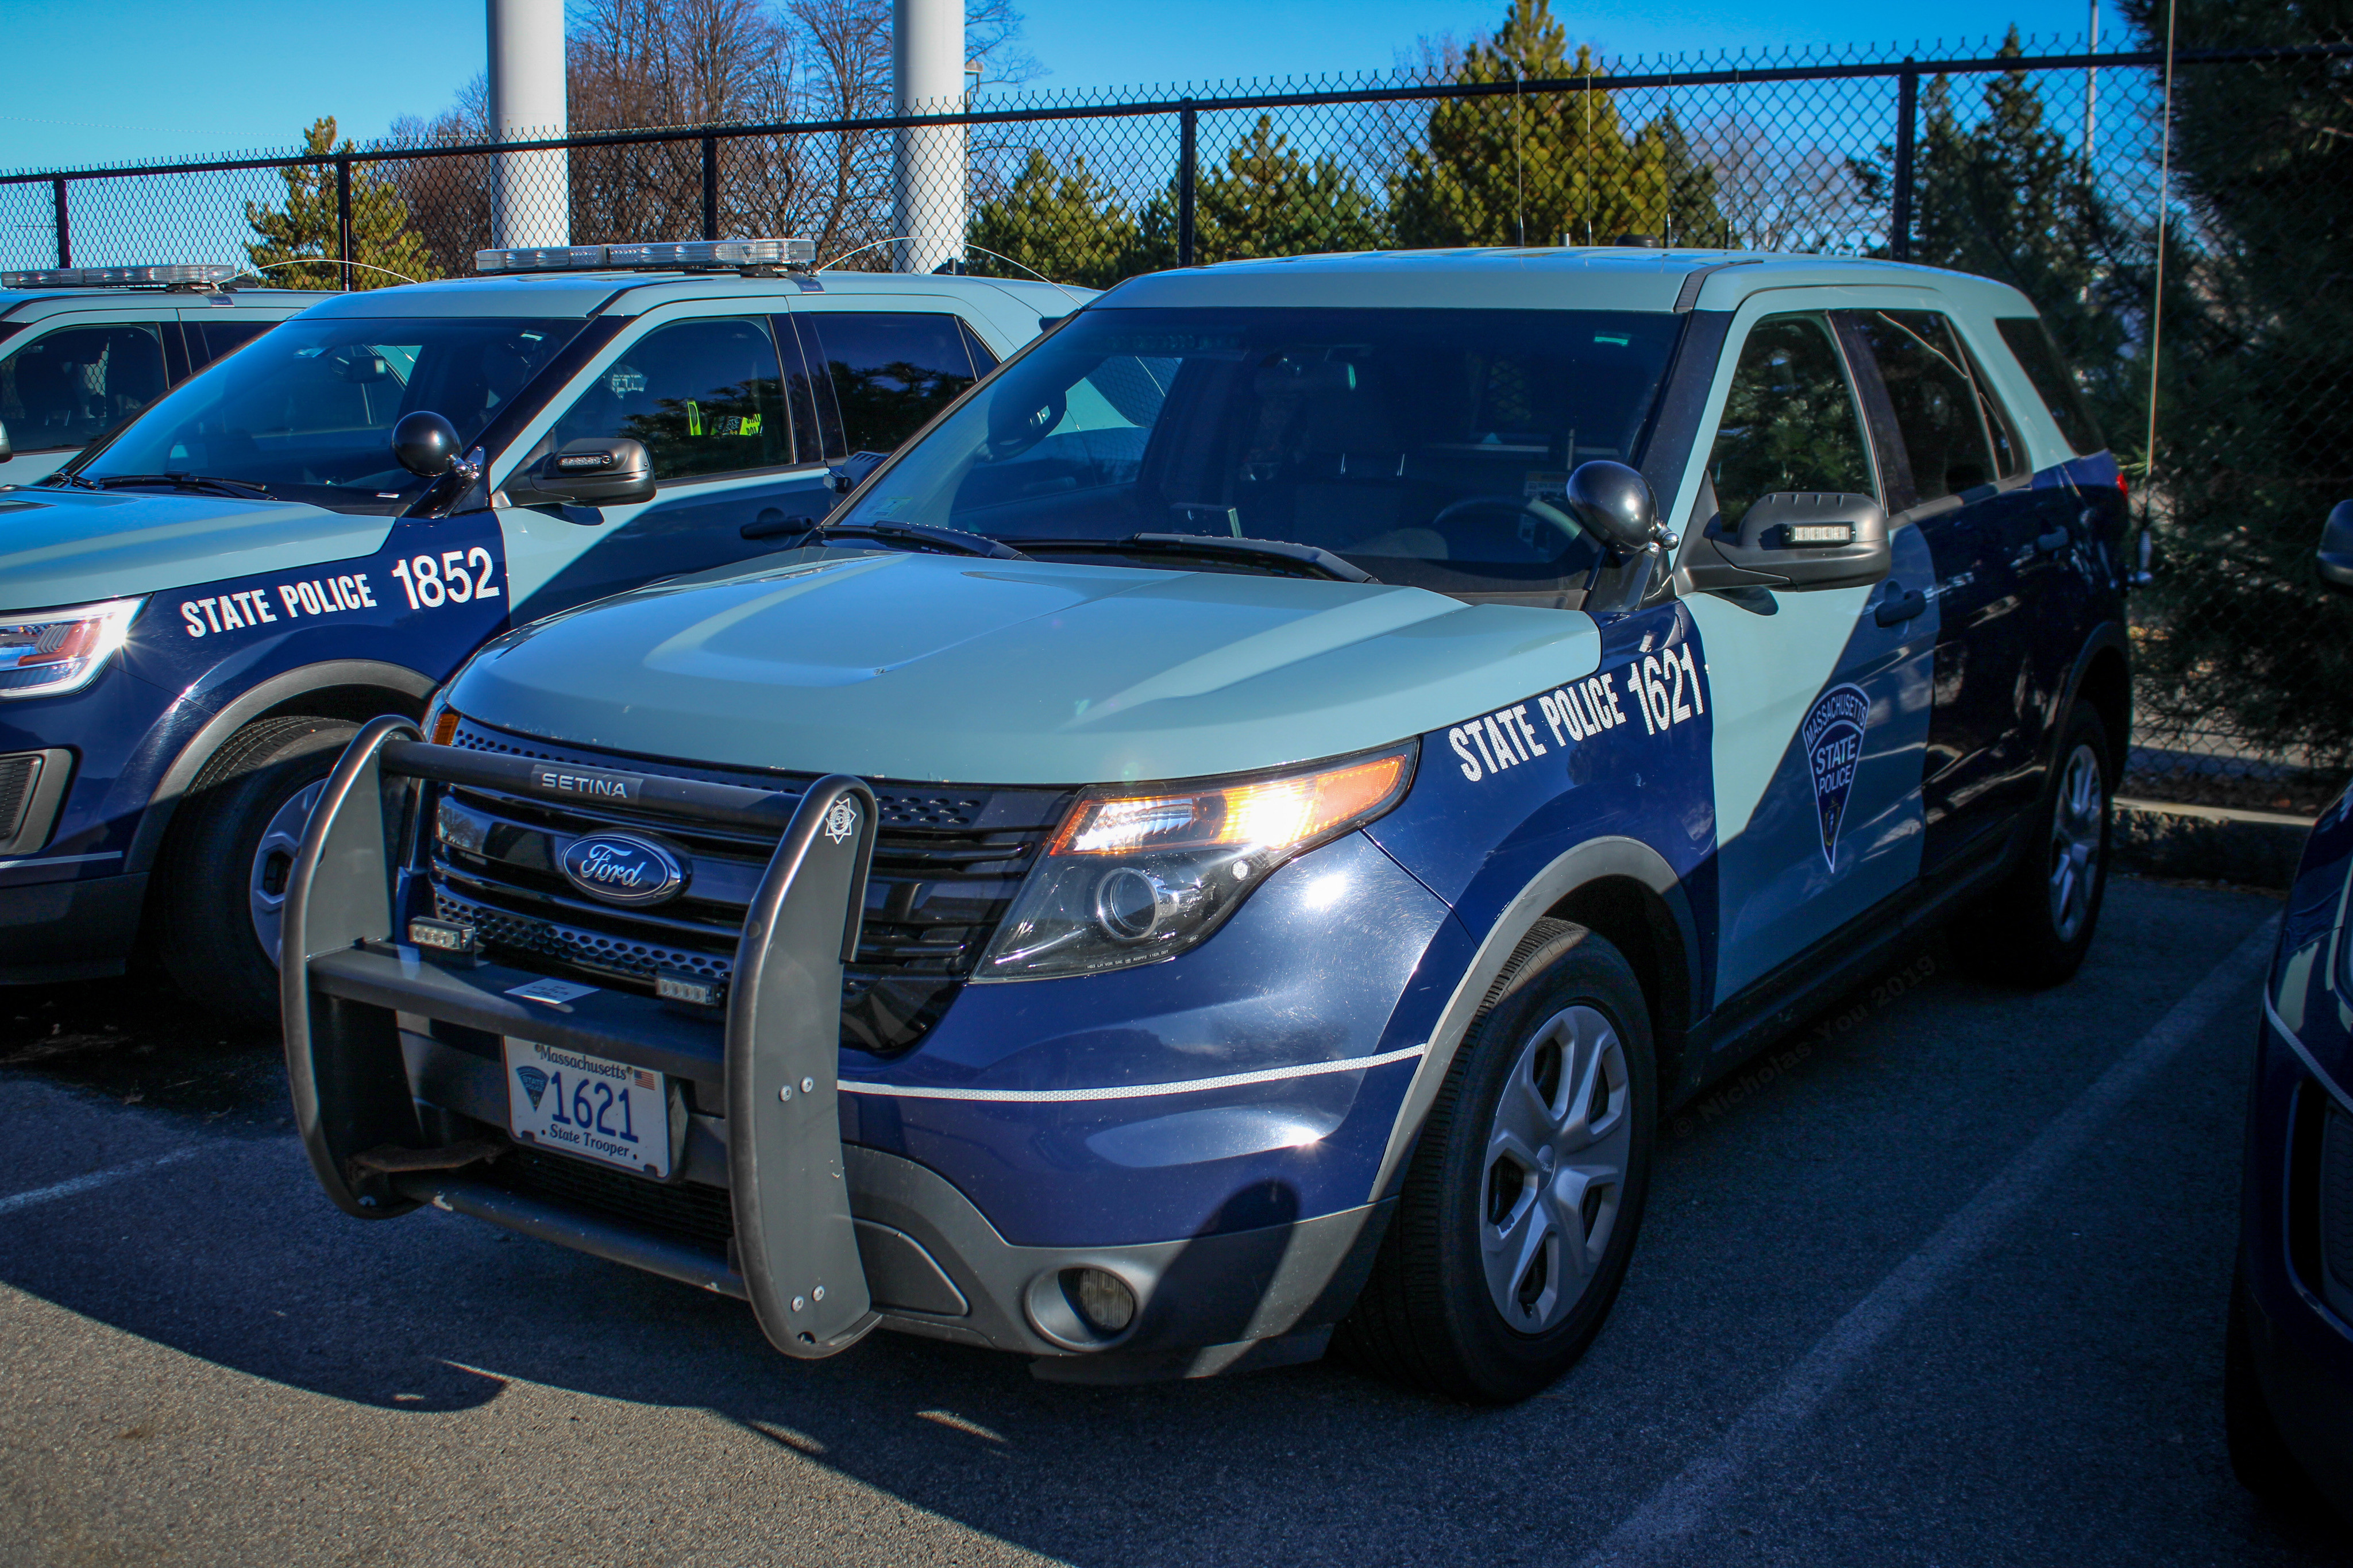 A photo  of Massachusetts State Police
            Cruiser 1621, a 2013 Ford Police Interceptor Utility             taken by Nicholas You